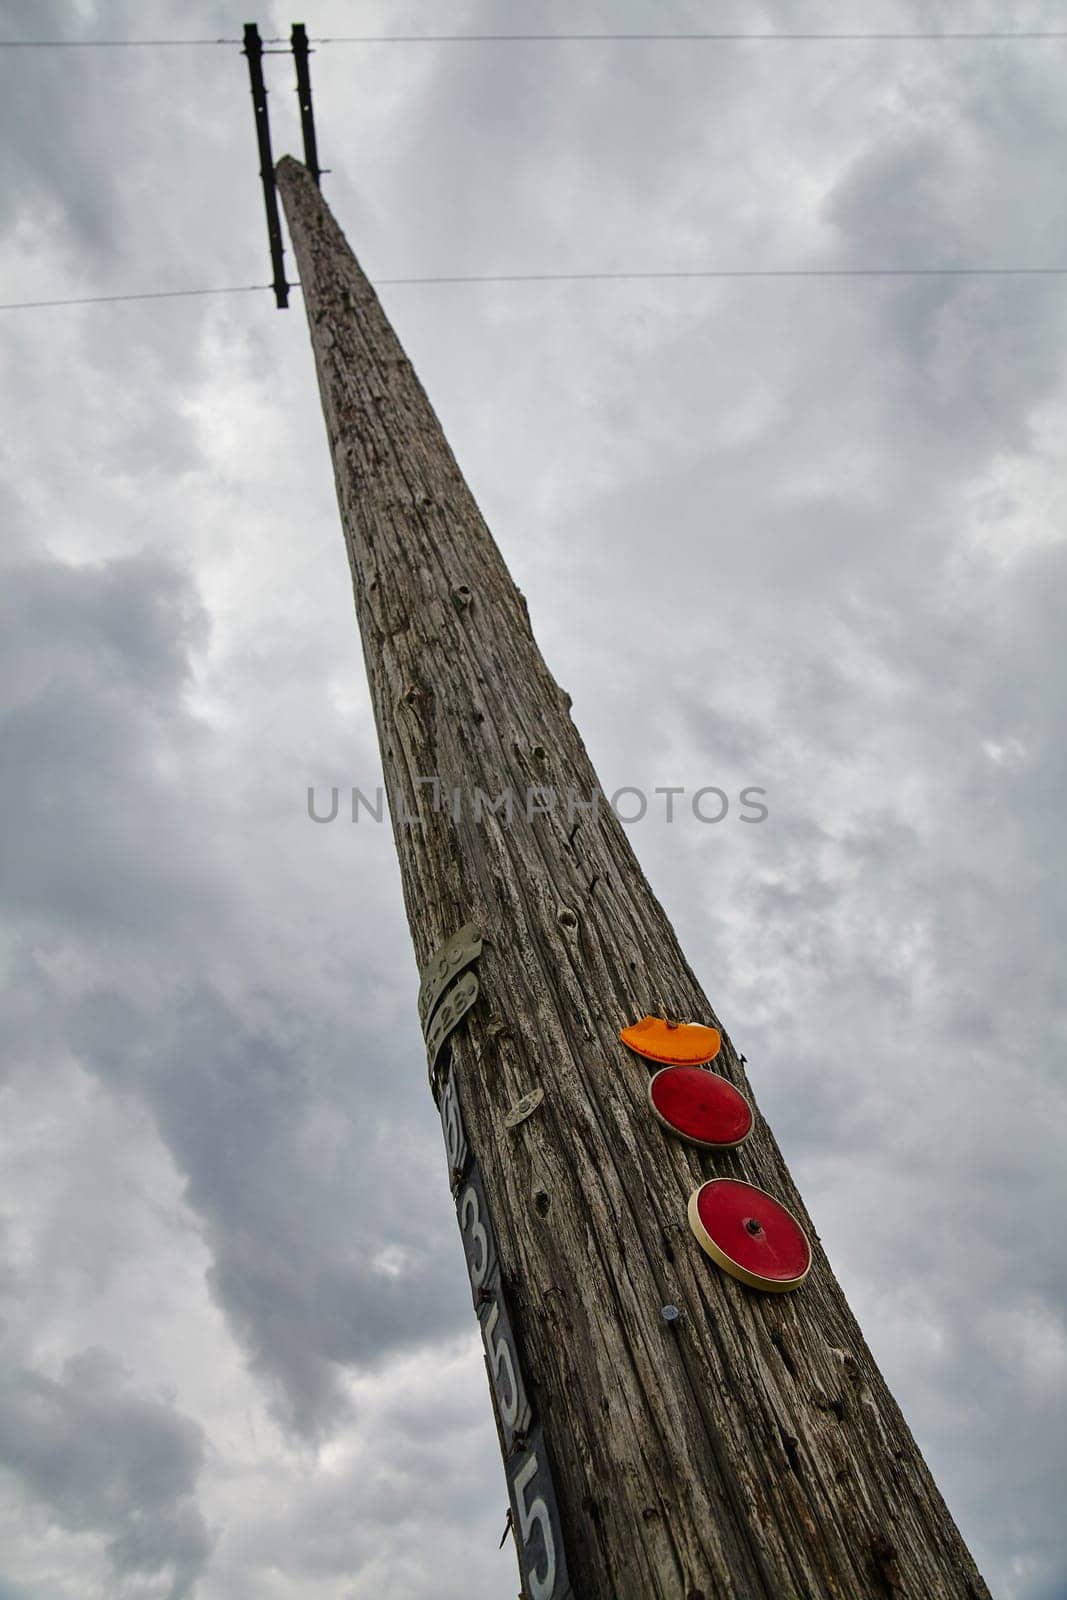 Vertical Perspective Weathered Utility Pole Reflective Markers and Cloudy Sky by njproductions